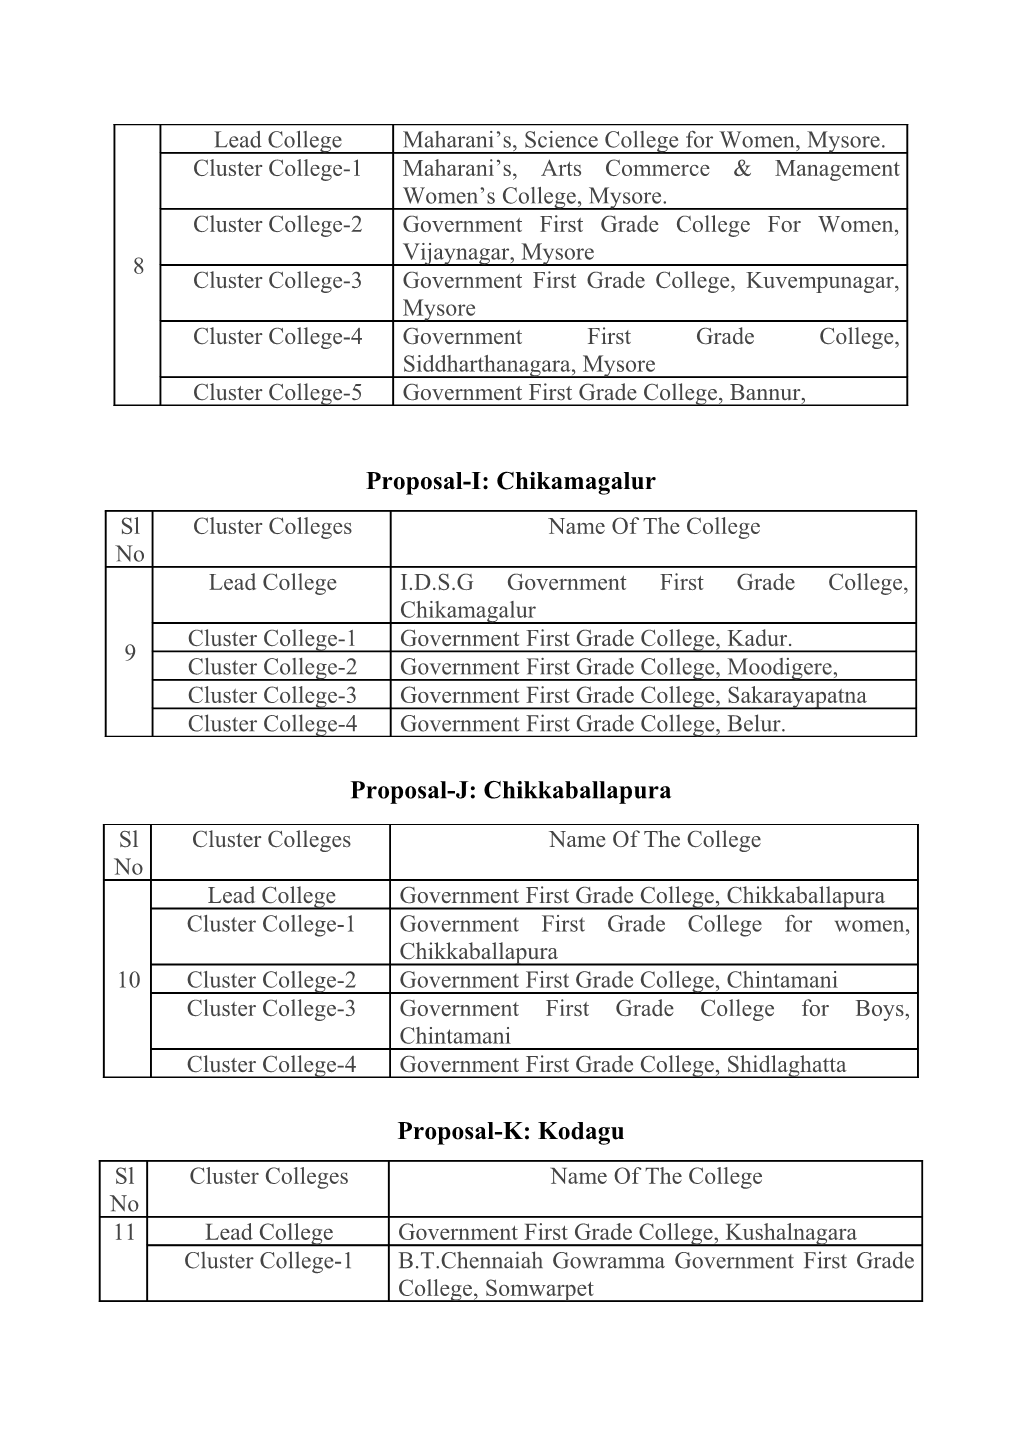 List of Proposals for Cluster Universities